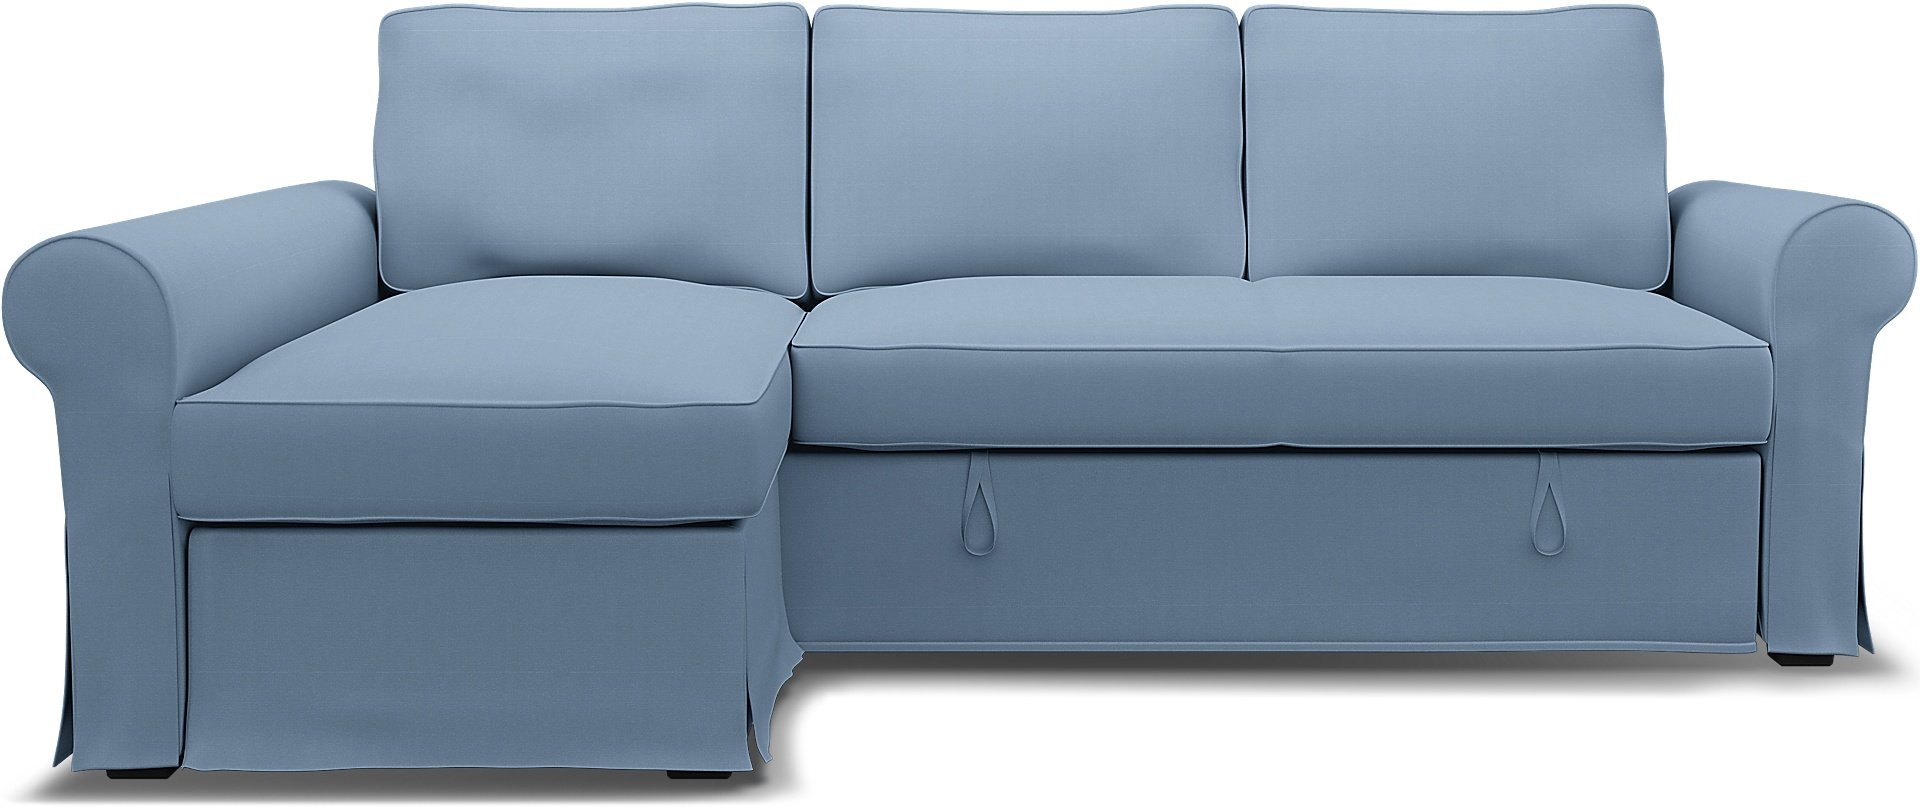 IKEA - Backabro Sofabed with Chaise Cover, Dusty Blue, Cotton - Bemz